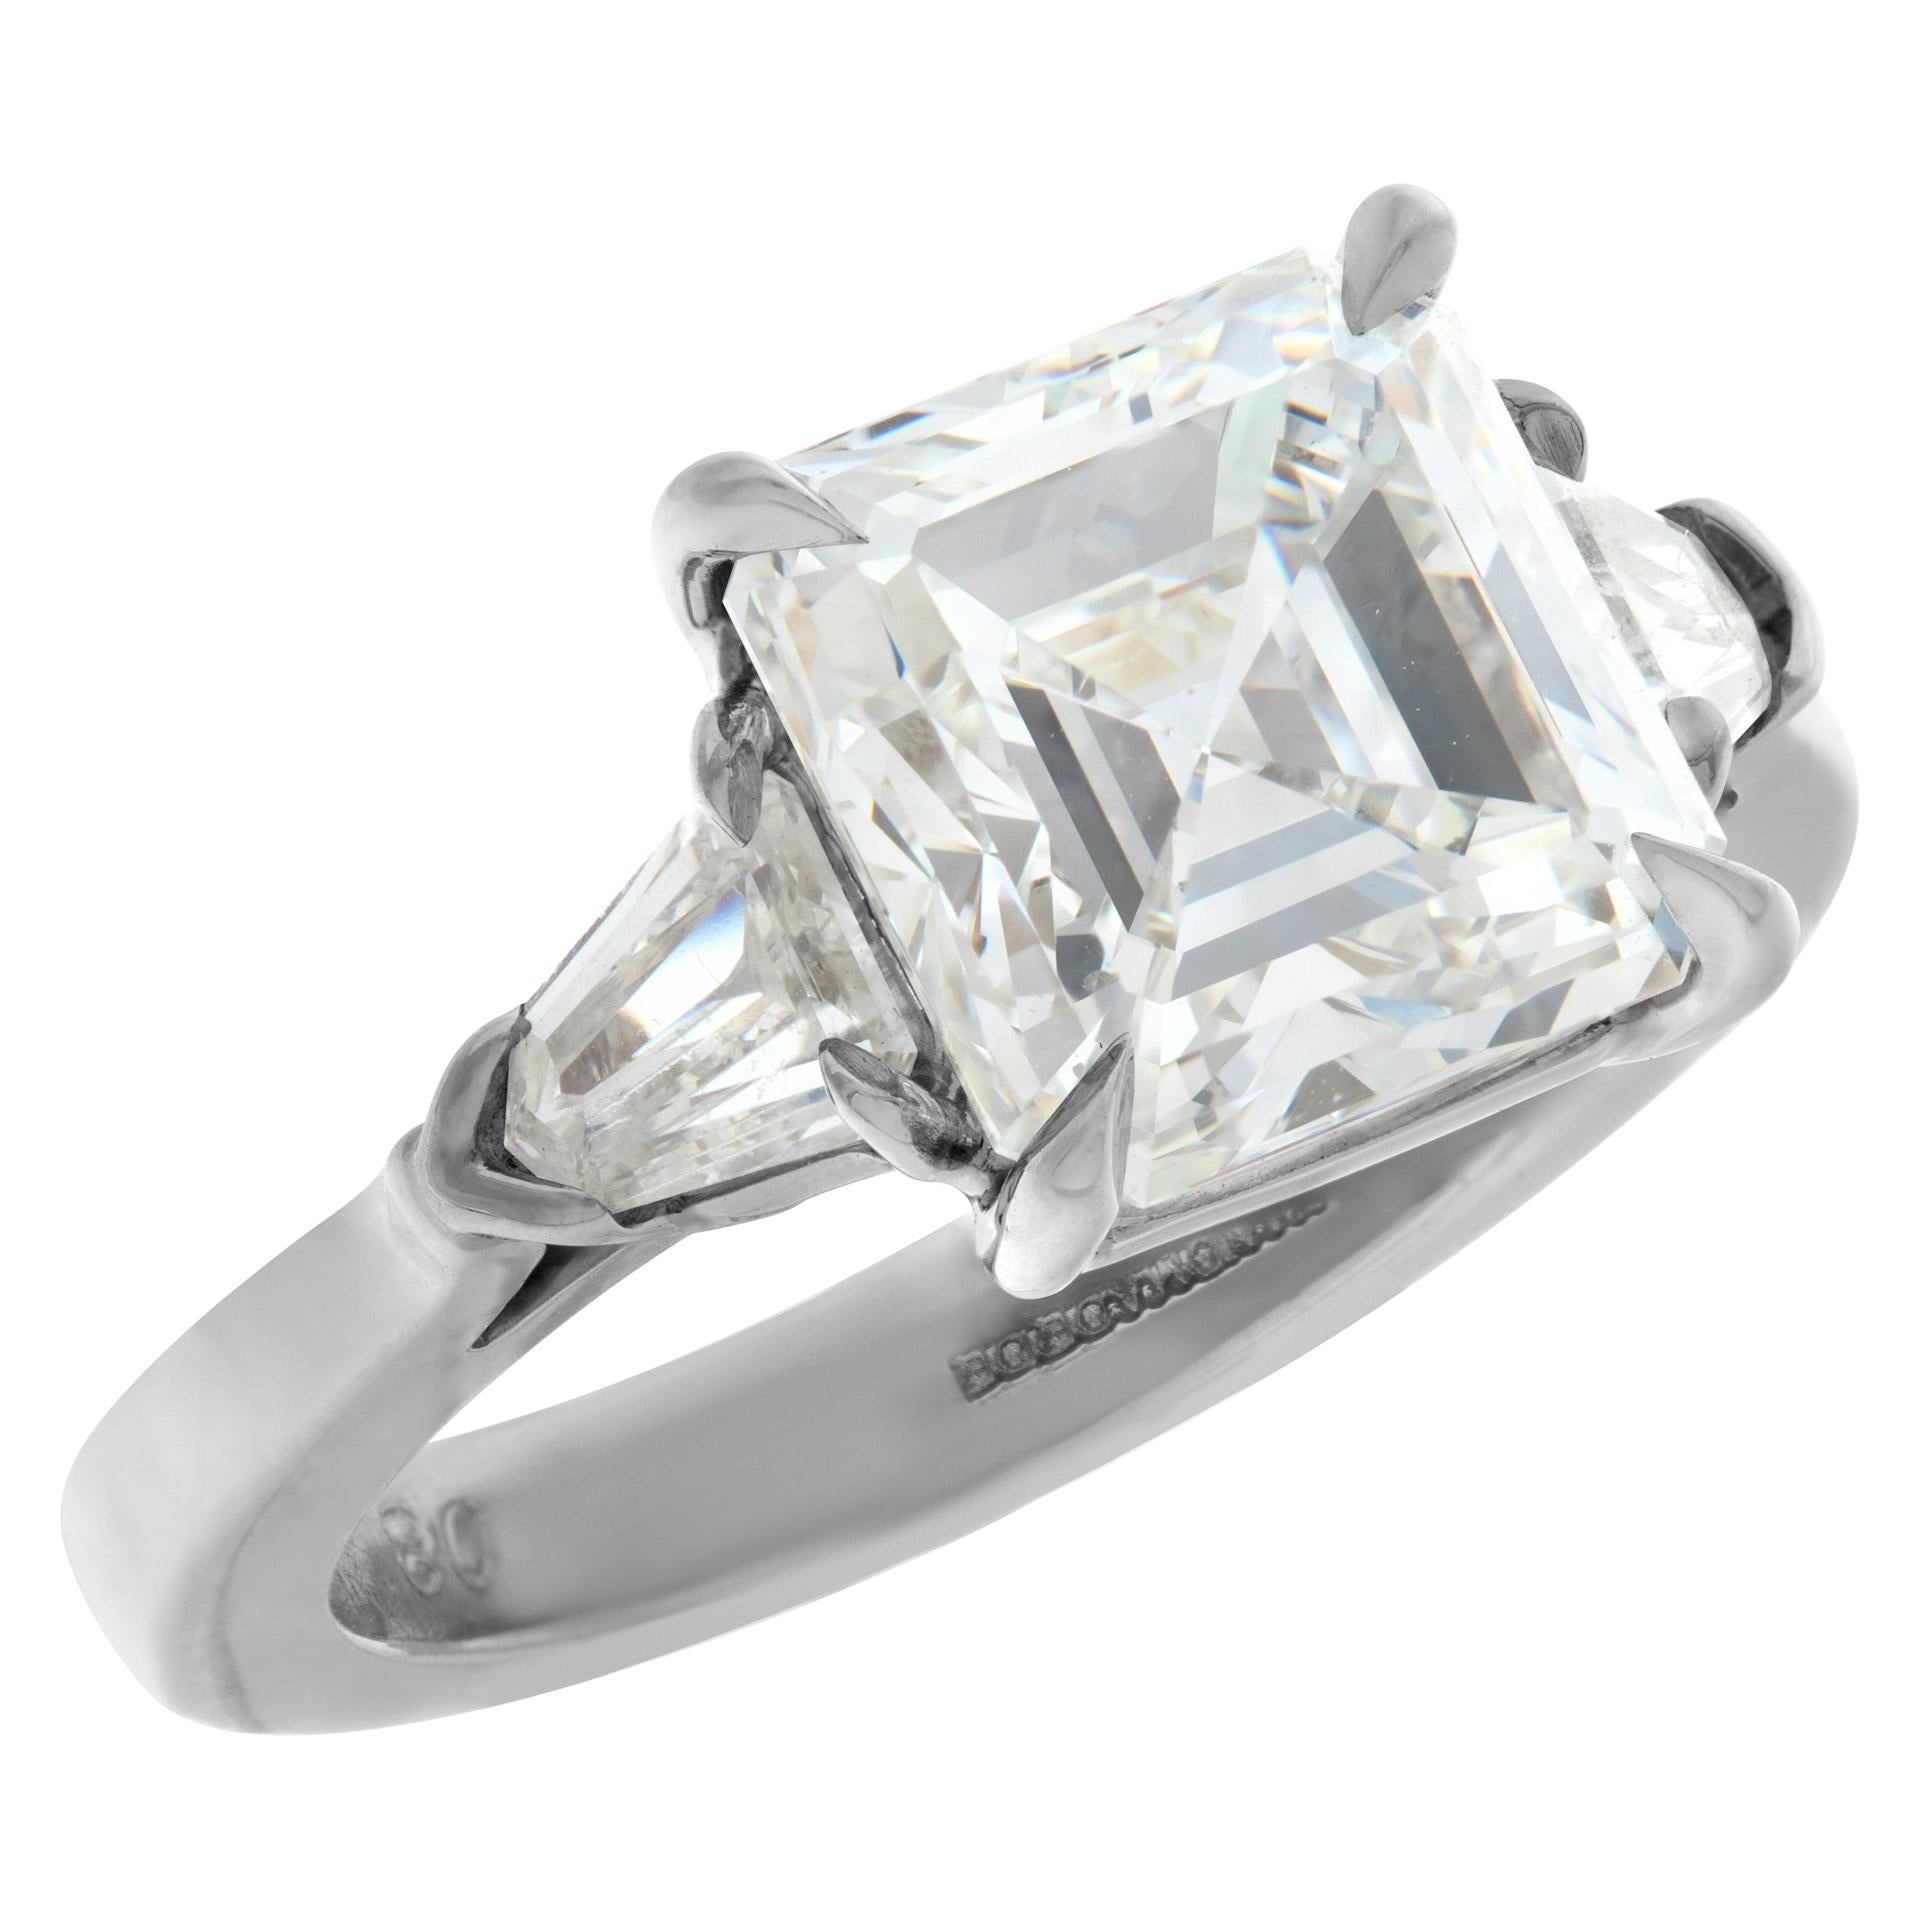 GIA Certified Square Emerald Cut Diamond 4.08 Carat Platinum Ring In Excellent Condition For Sale In Surfside, FL